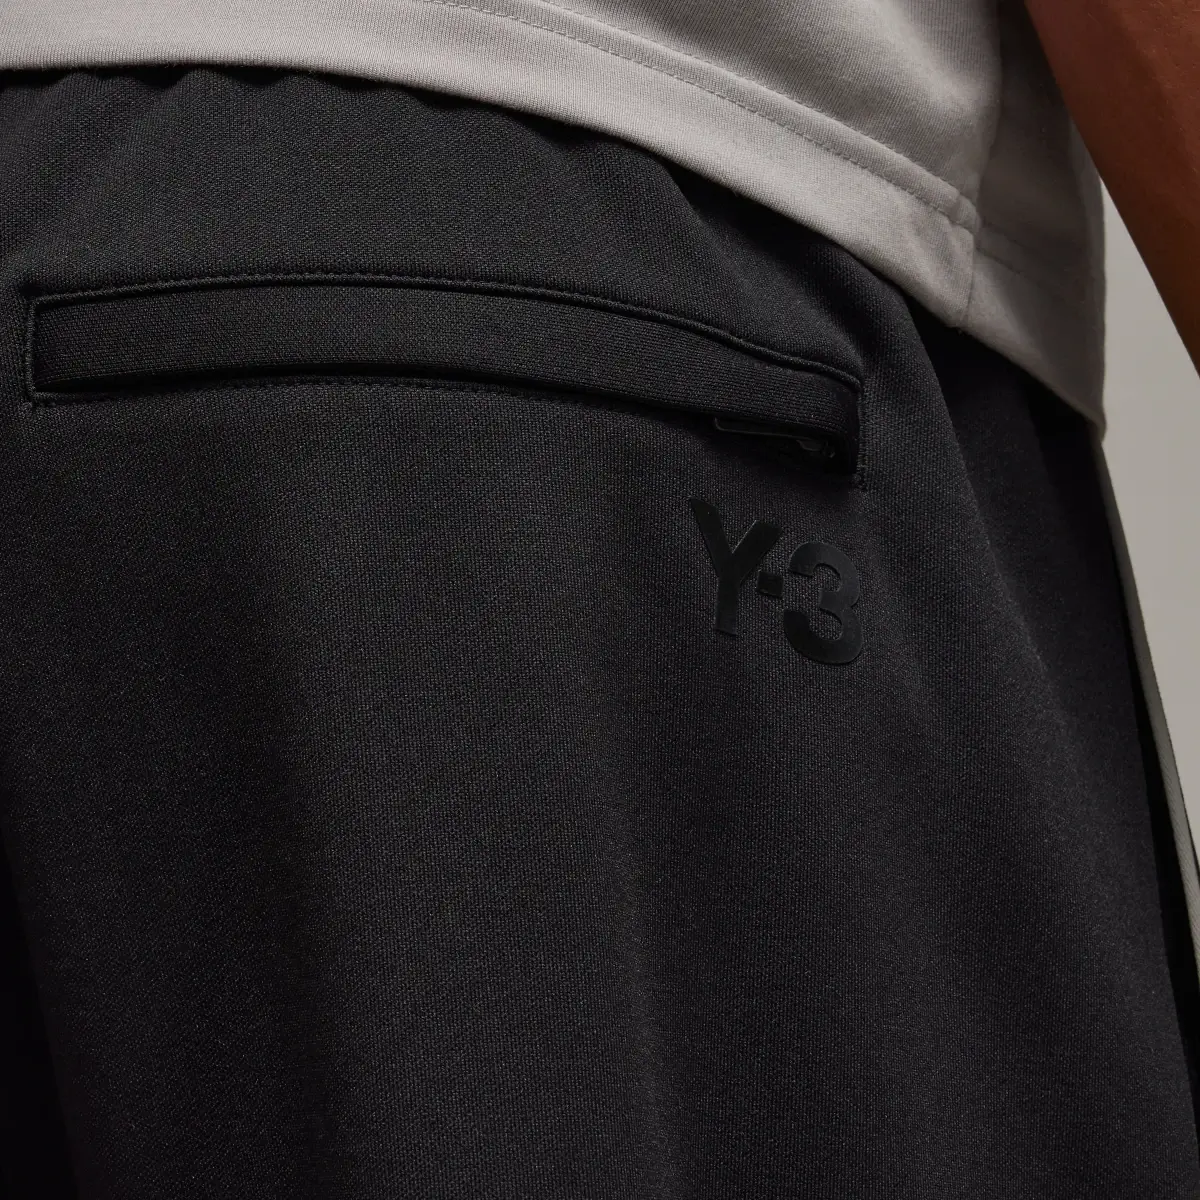 Adidas Y-3 SST Track Tracksuit Bottoms. 3